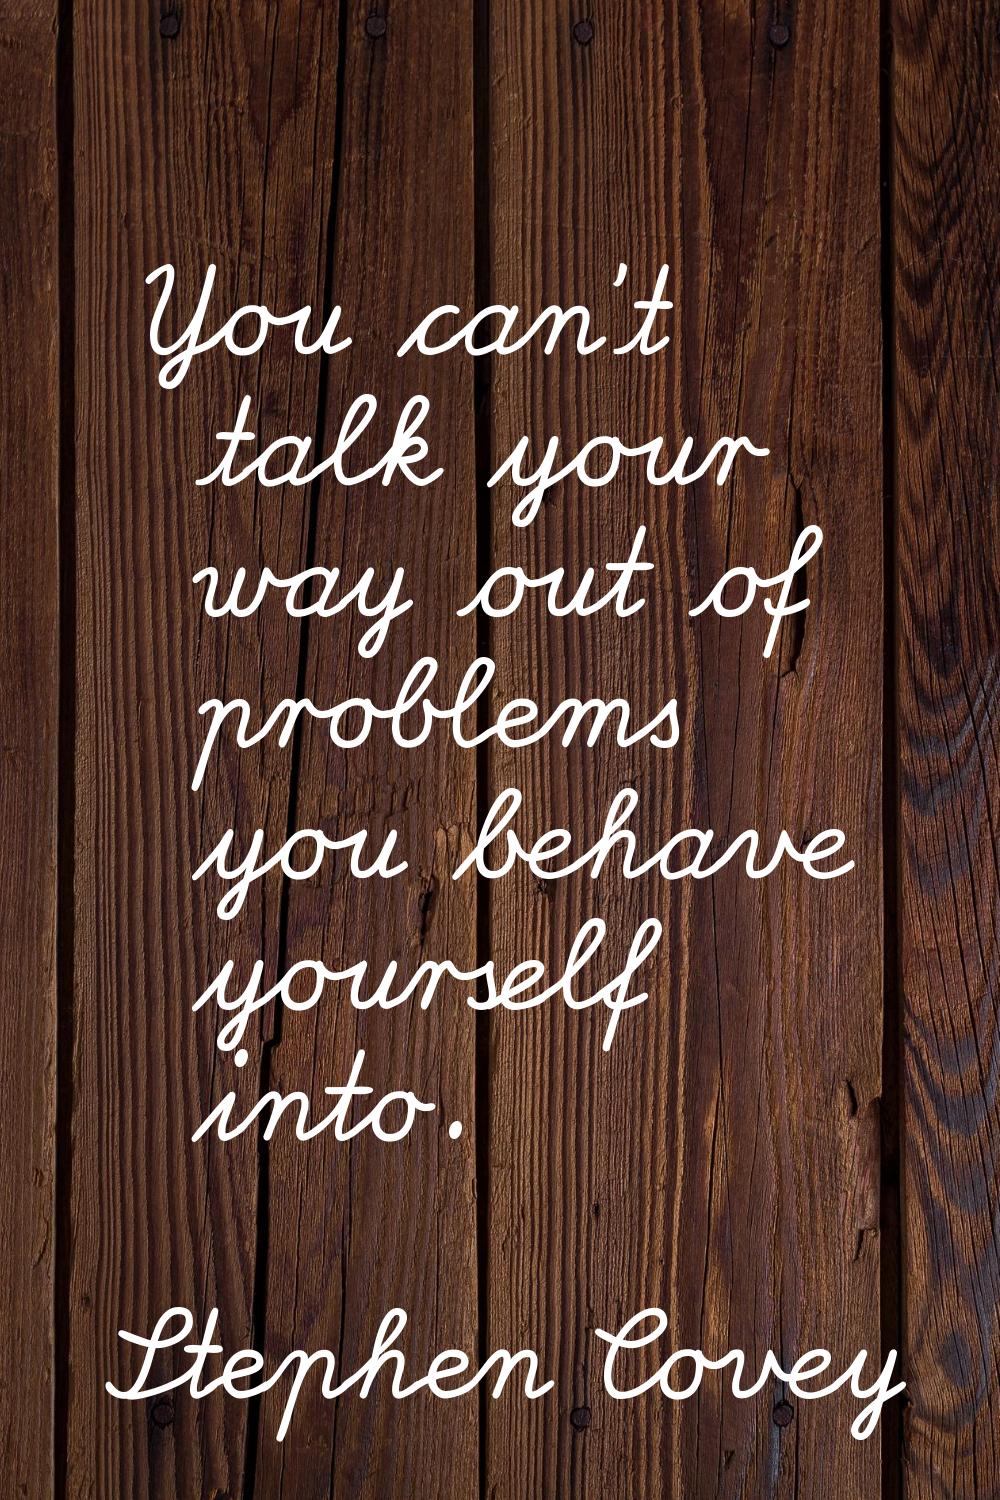 You can't talk your way out of problems you behave yourself into.